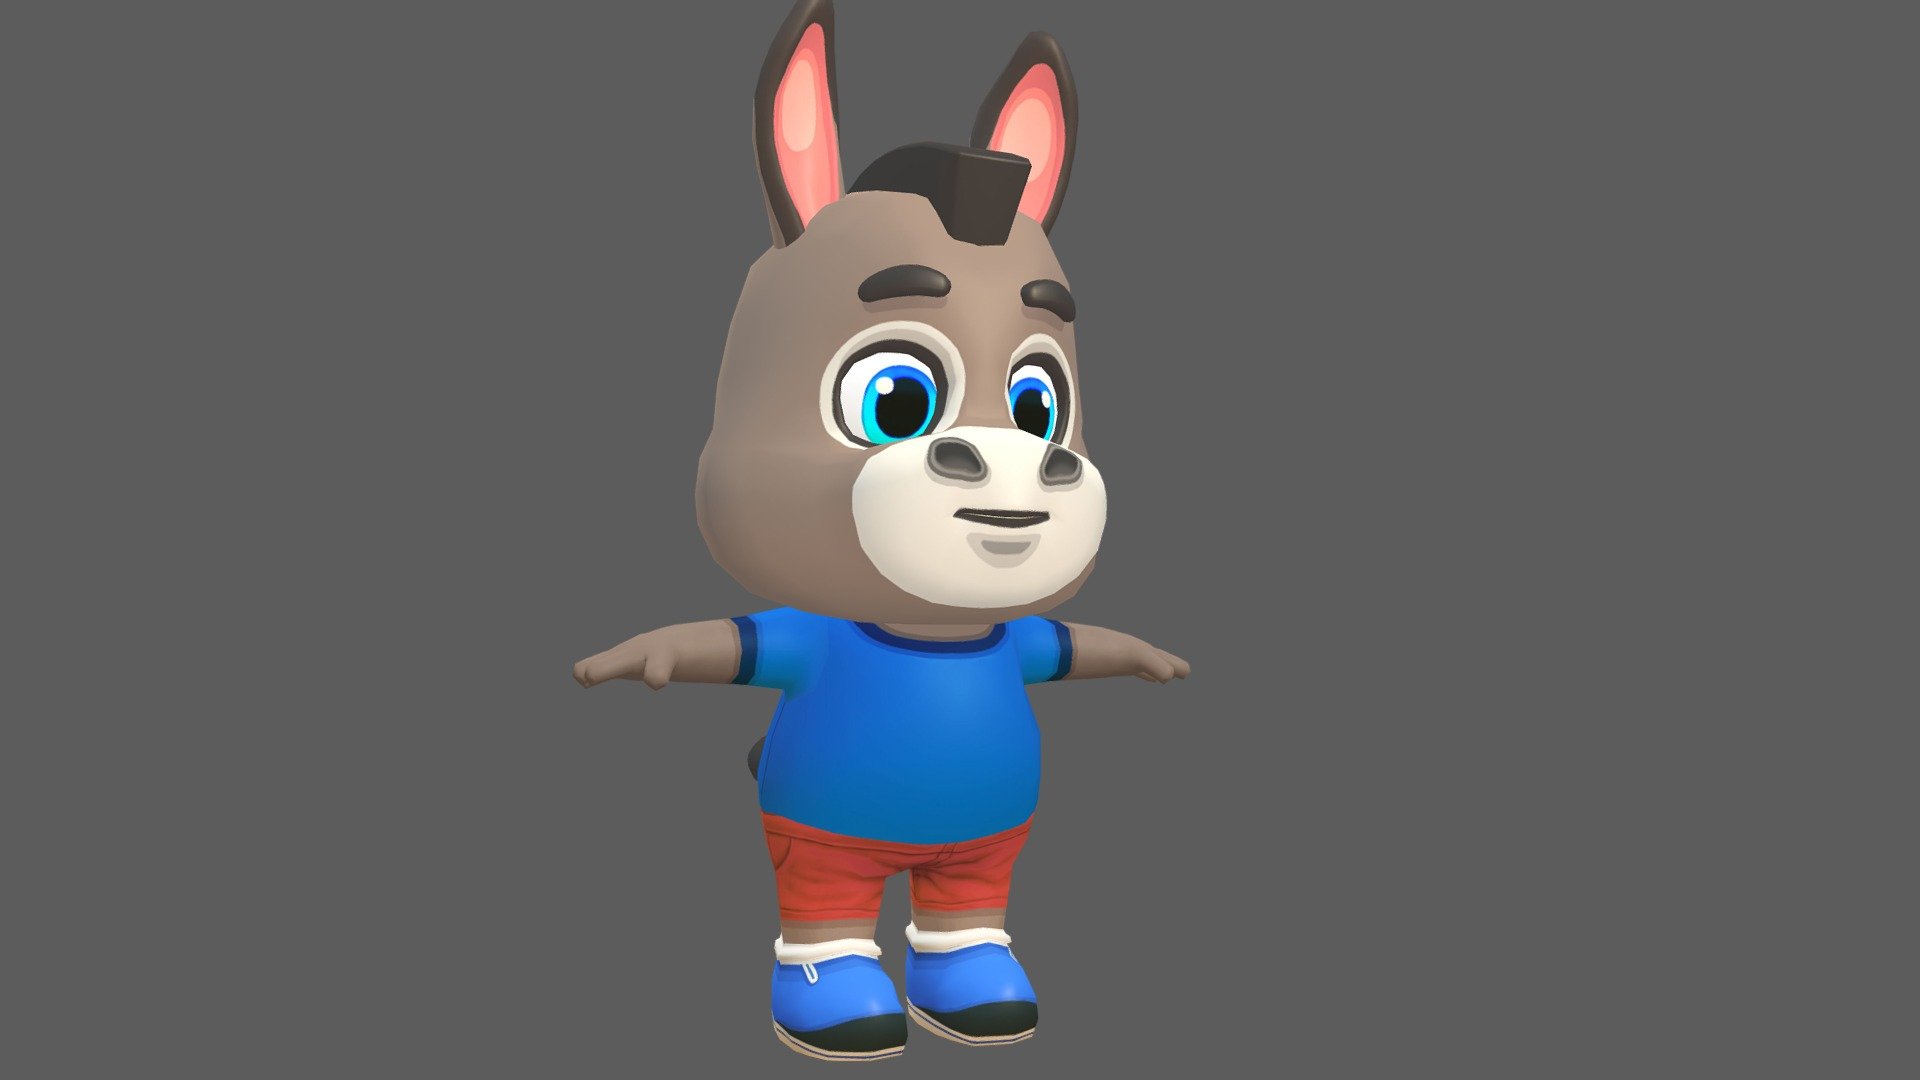 Donkey Mule character for games and animations. The model is game ready and compatible with game engines.

Included Files:




Maya (Source files, Rig) for Unity and Unreal (.ma, .mb) - 2015 - 2020

FBX for Unity - 2014 - 2020

FBX for Unreal - 2014 - 2020

OBJ

Unity Project - Preconfigured Humanoid Rig

Supports Humanoid Animation:




Preconfigured Humanoid Rig &amp; Animation Clips

Unity Humanoid compatible FBX

Mixamo

Low poly model with four texture resolutions 4096x4096, 2048x2048, 1024x1024 &amp; 512x512.

The package includes 20 Animations:




Walk

Run

Idle

Jump

Leap left

Leap right

Death

Skidding

Roll

Crash

Power up

Whirl

Whirl jump

Waving in air

Backwards run

Dizzy

Gum Bubble

Gliding

Waving

Looking behind

The model is fully rigged and can be easily animated or modified if required.

The model is game ready at:




3938 Polys

3946 Verts

UV mapped with non-overlapping UV's. The shadows and lights are baked in the texture 3d model